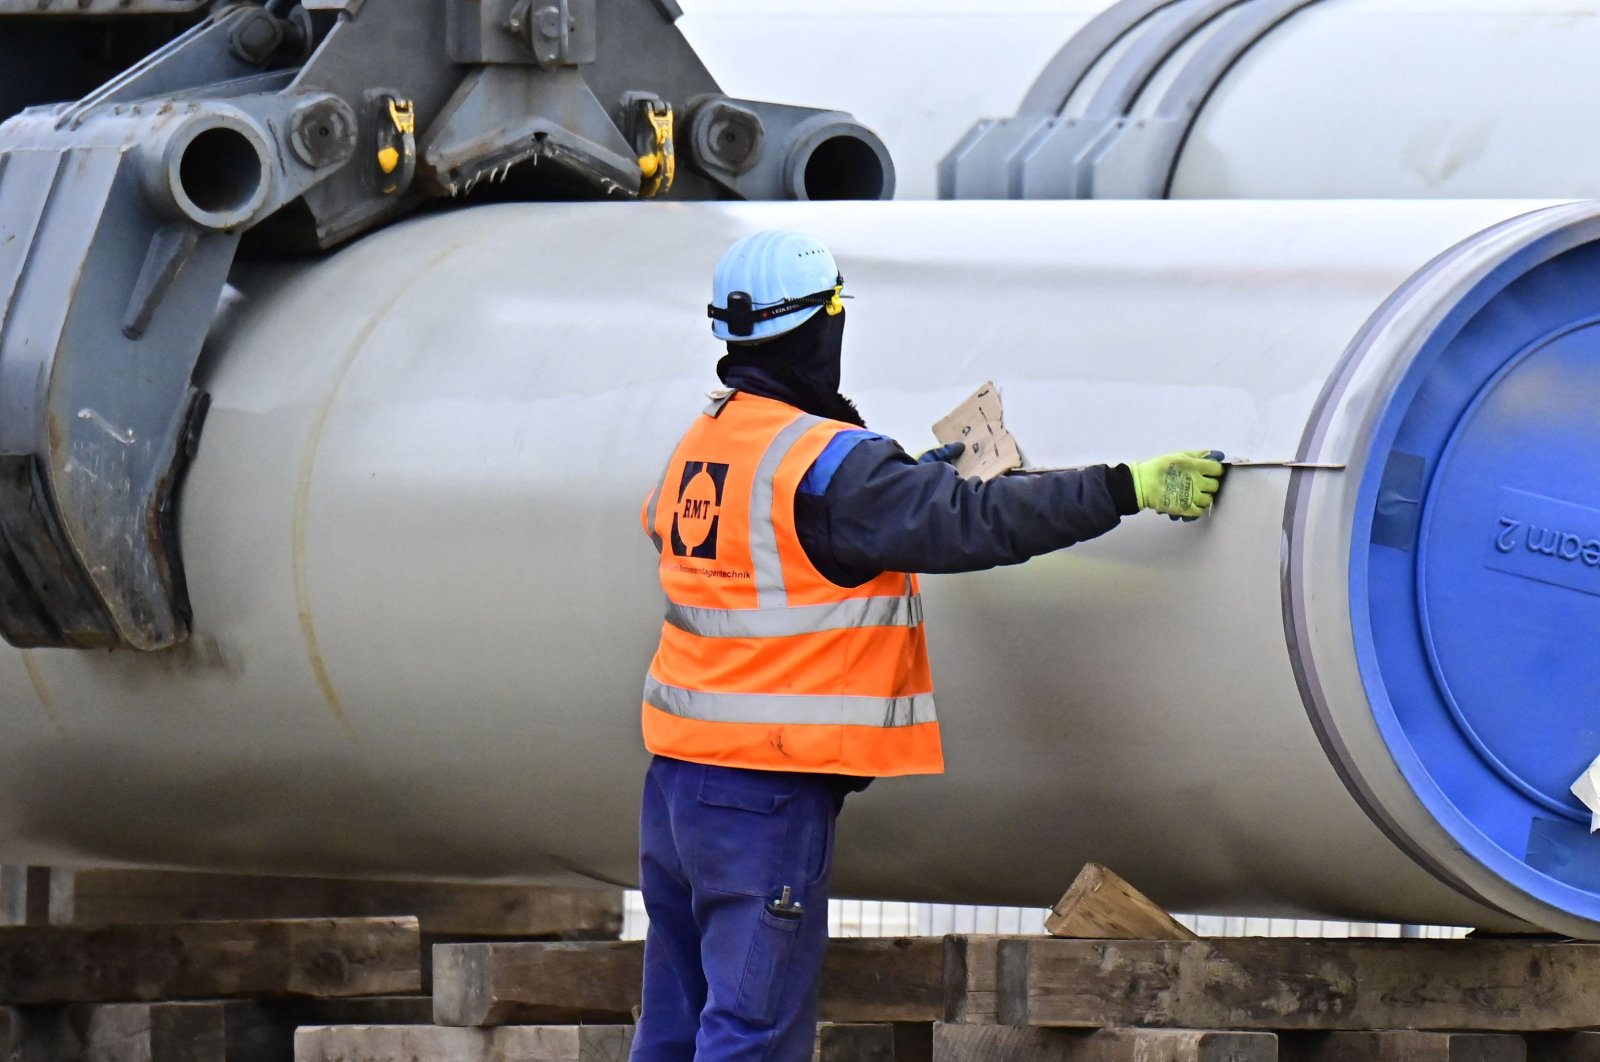 A worker moves a pipe at the construction site of the so-called Nord Stream 2 gas pipeline in Lubmin, northeastern Germany, on March 26, 2019. (AFP Photo)